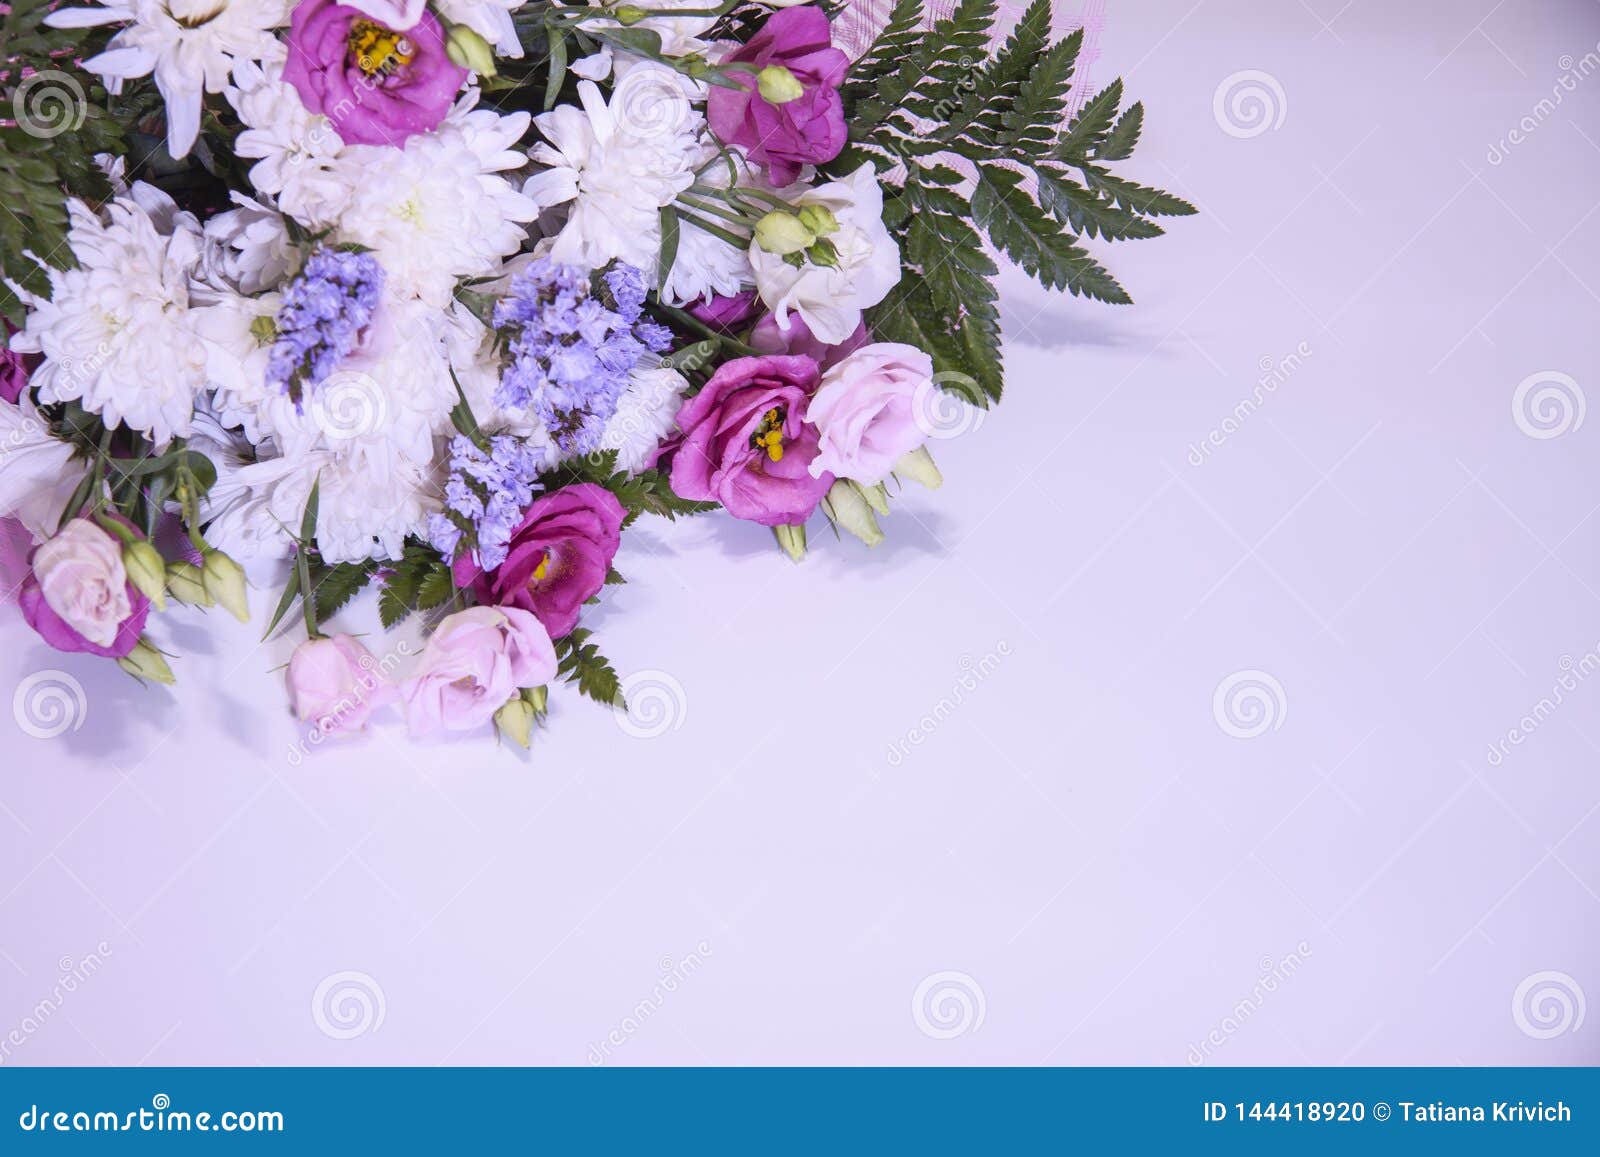 A Modern, Beautiful Floral Bouquet on a Purple Background. Stock ...